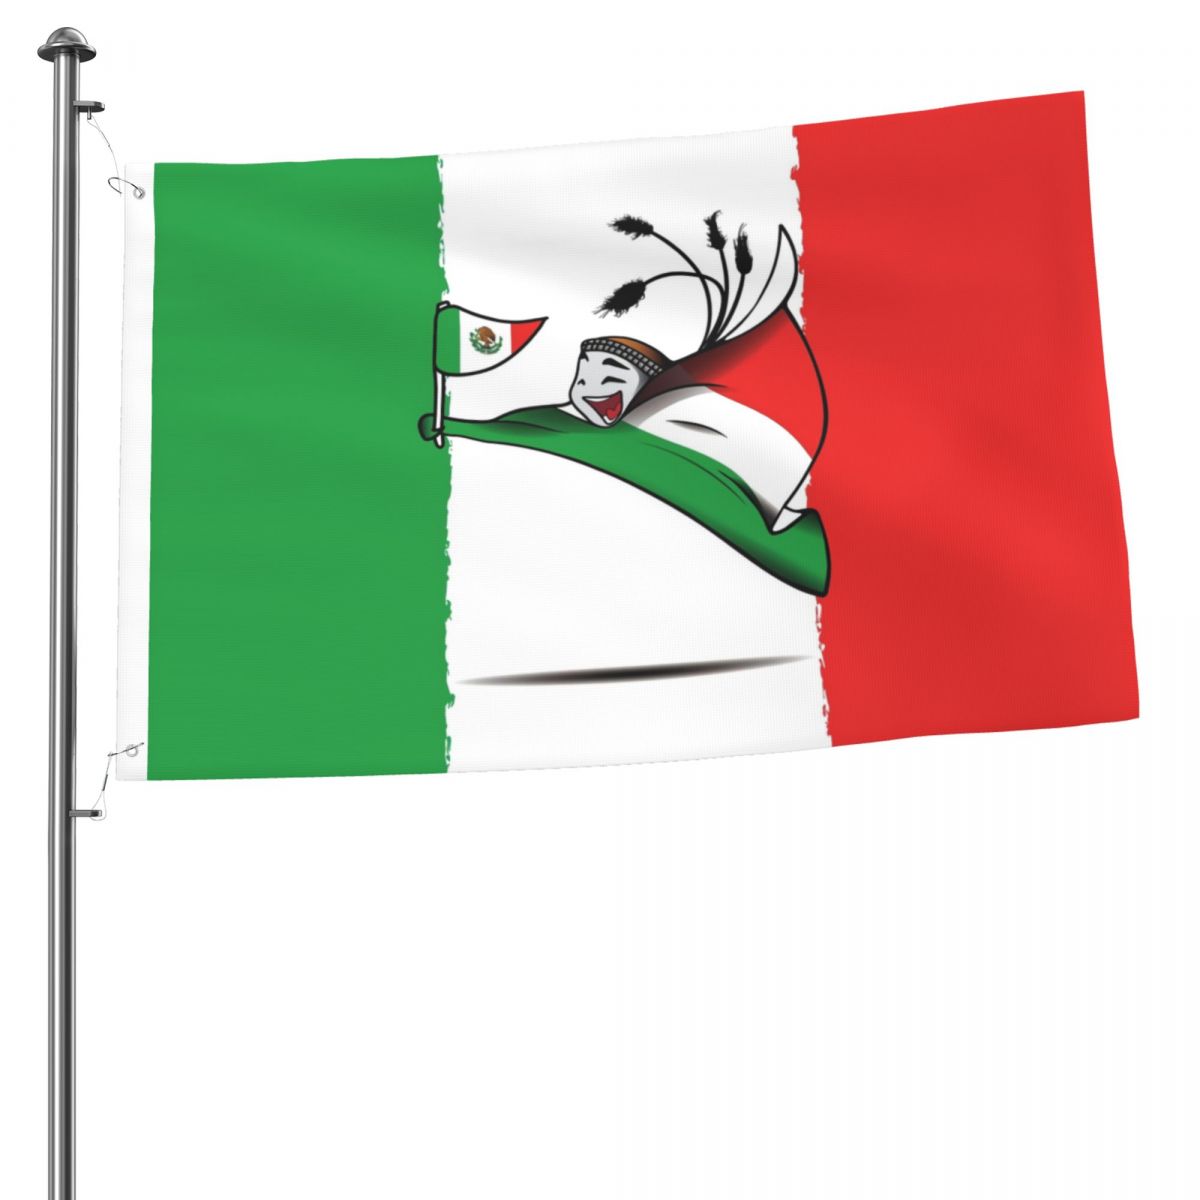 Mexico World Cup 2022 Mascot 2x3 FT UV Resistant Flag